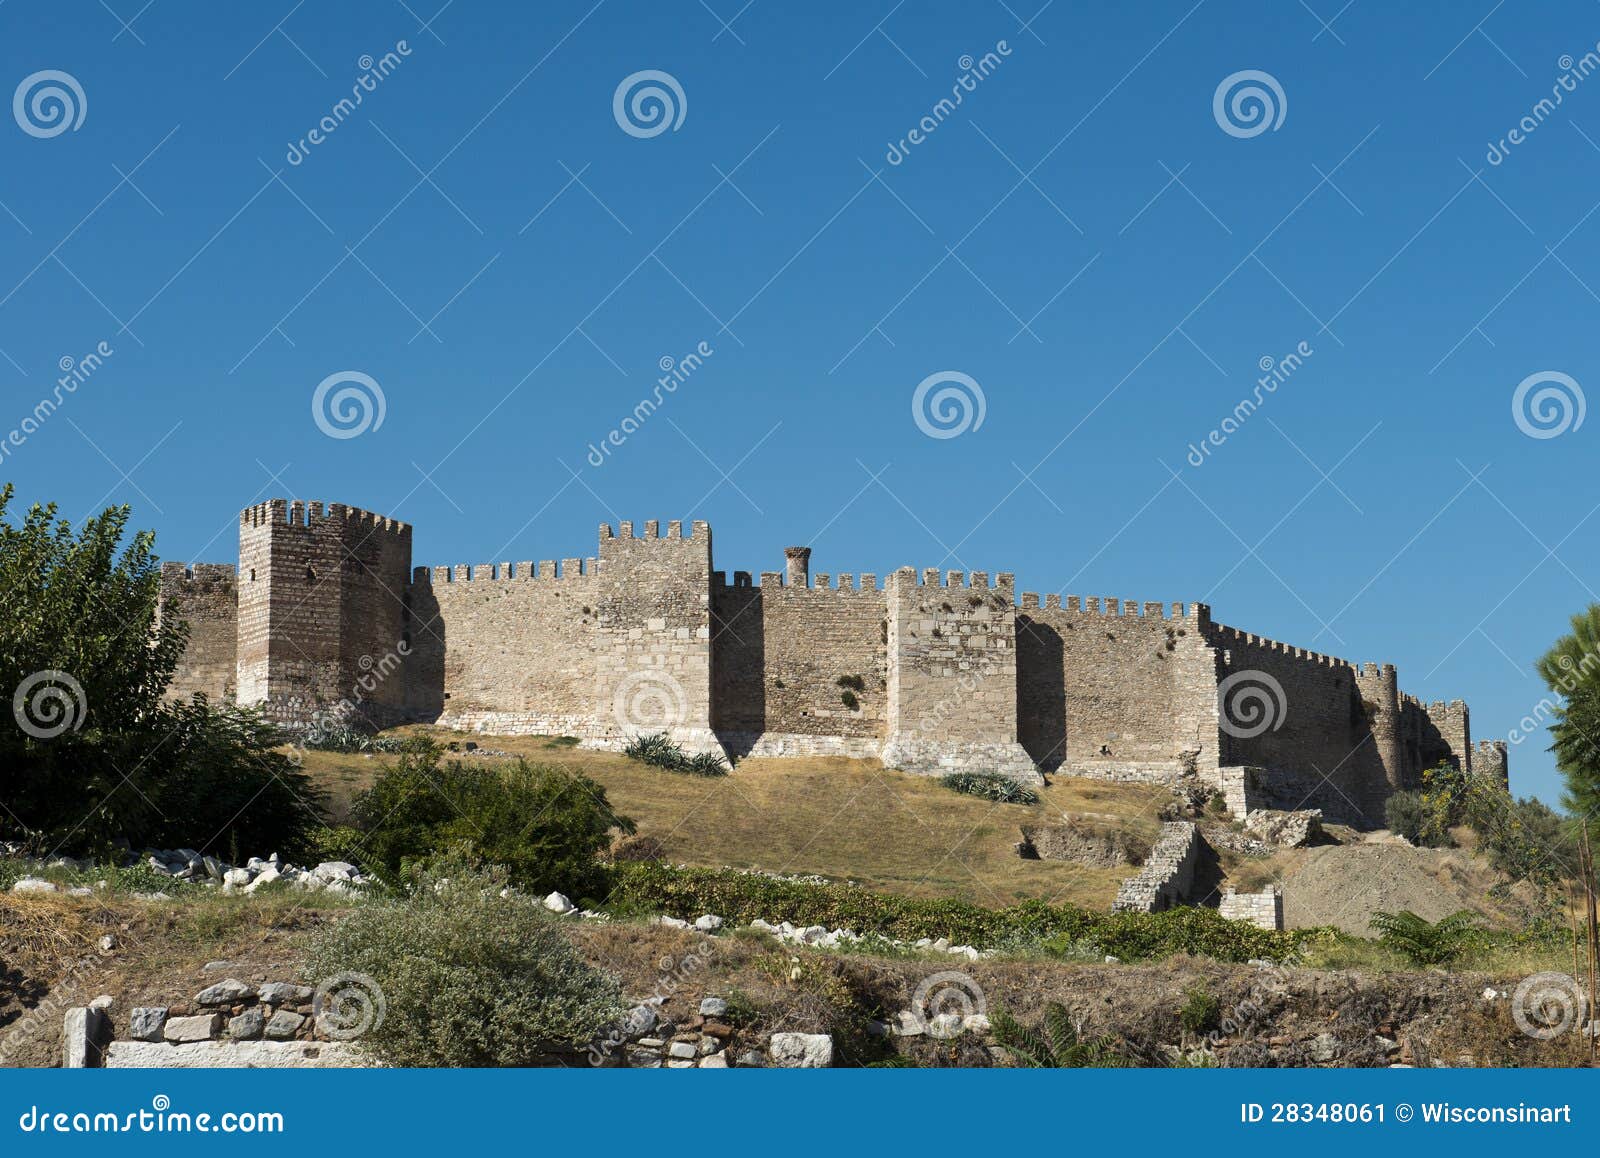 old medieval fort castle from middle ages